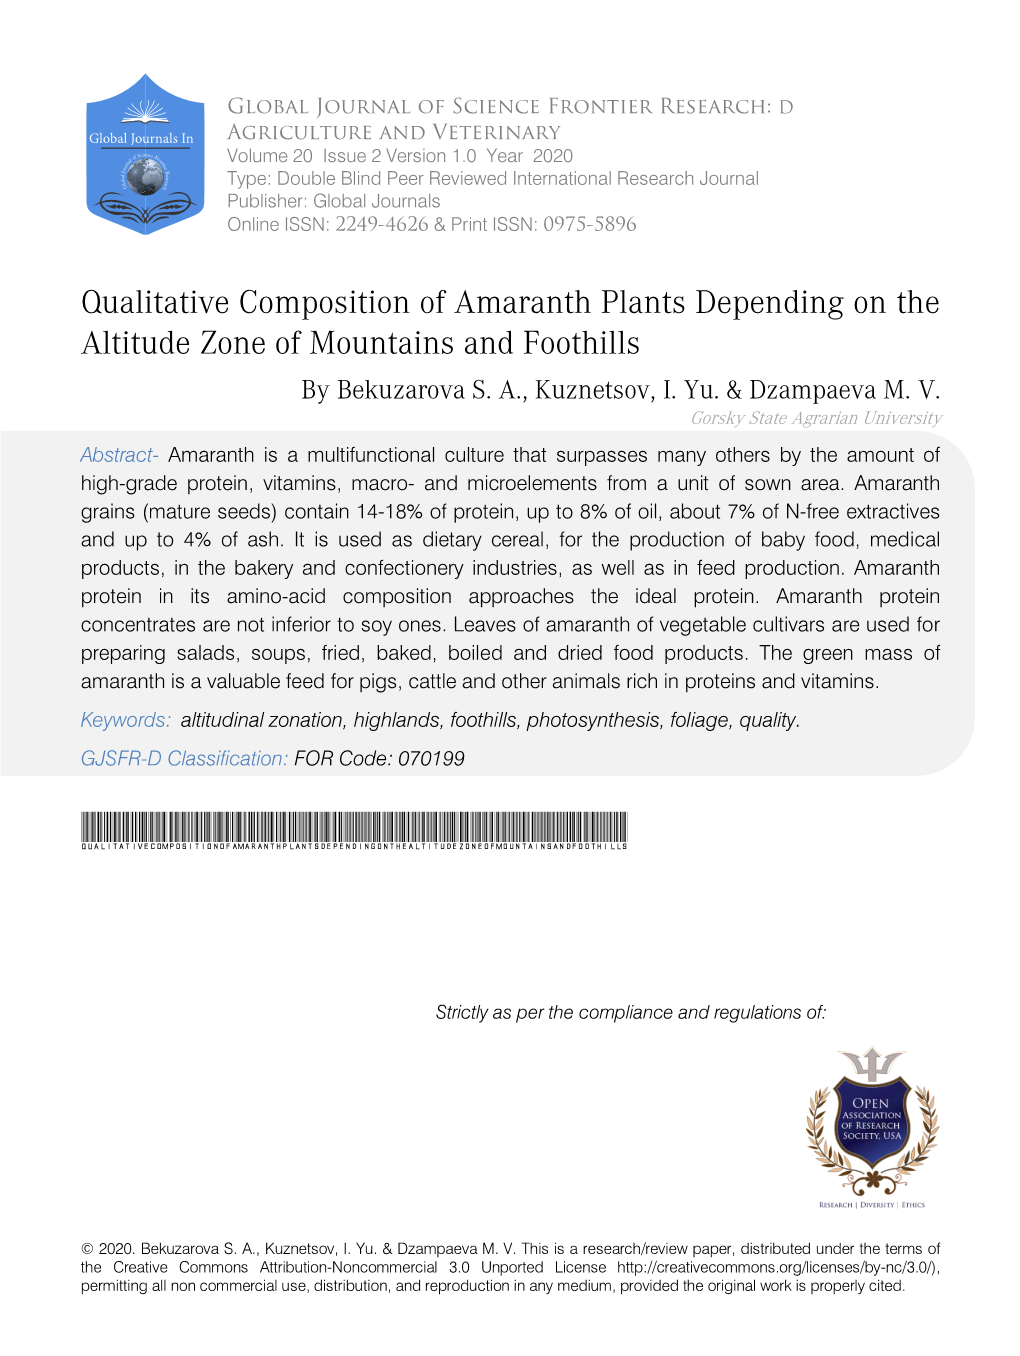 Qualitative Composition of Amaranth Plants Depending on the Altitude Zone of Mountains and Foothills by Bekuzarova S